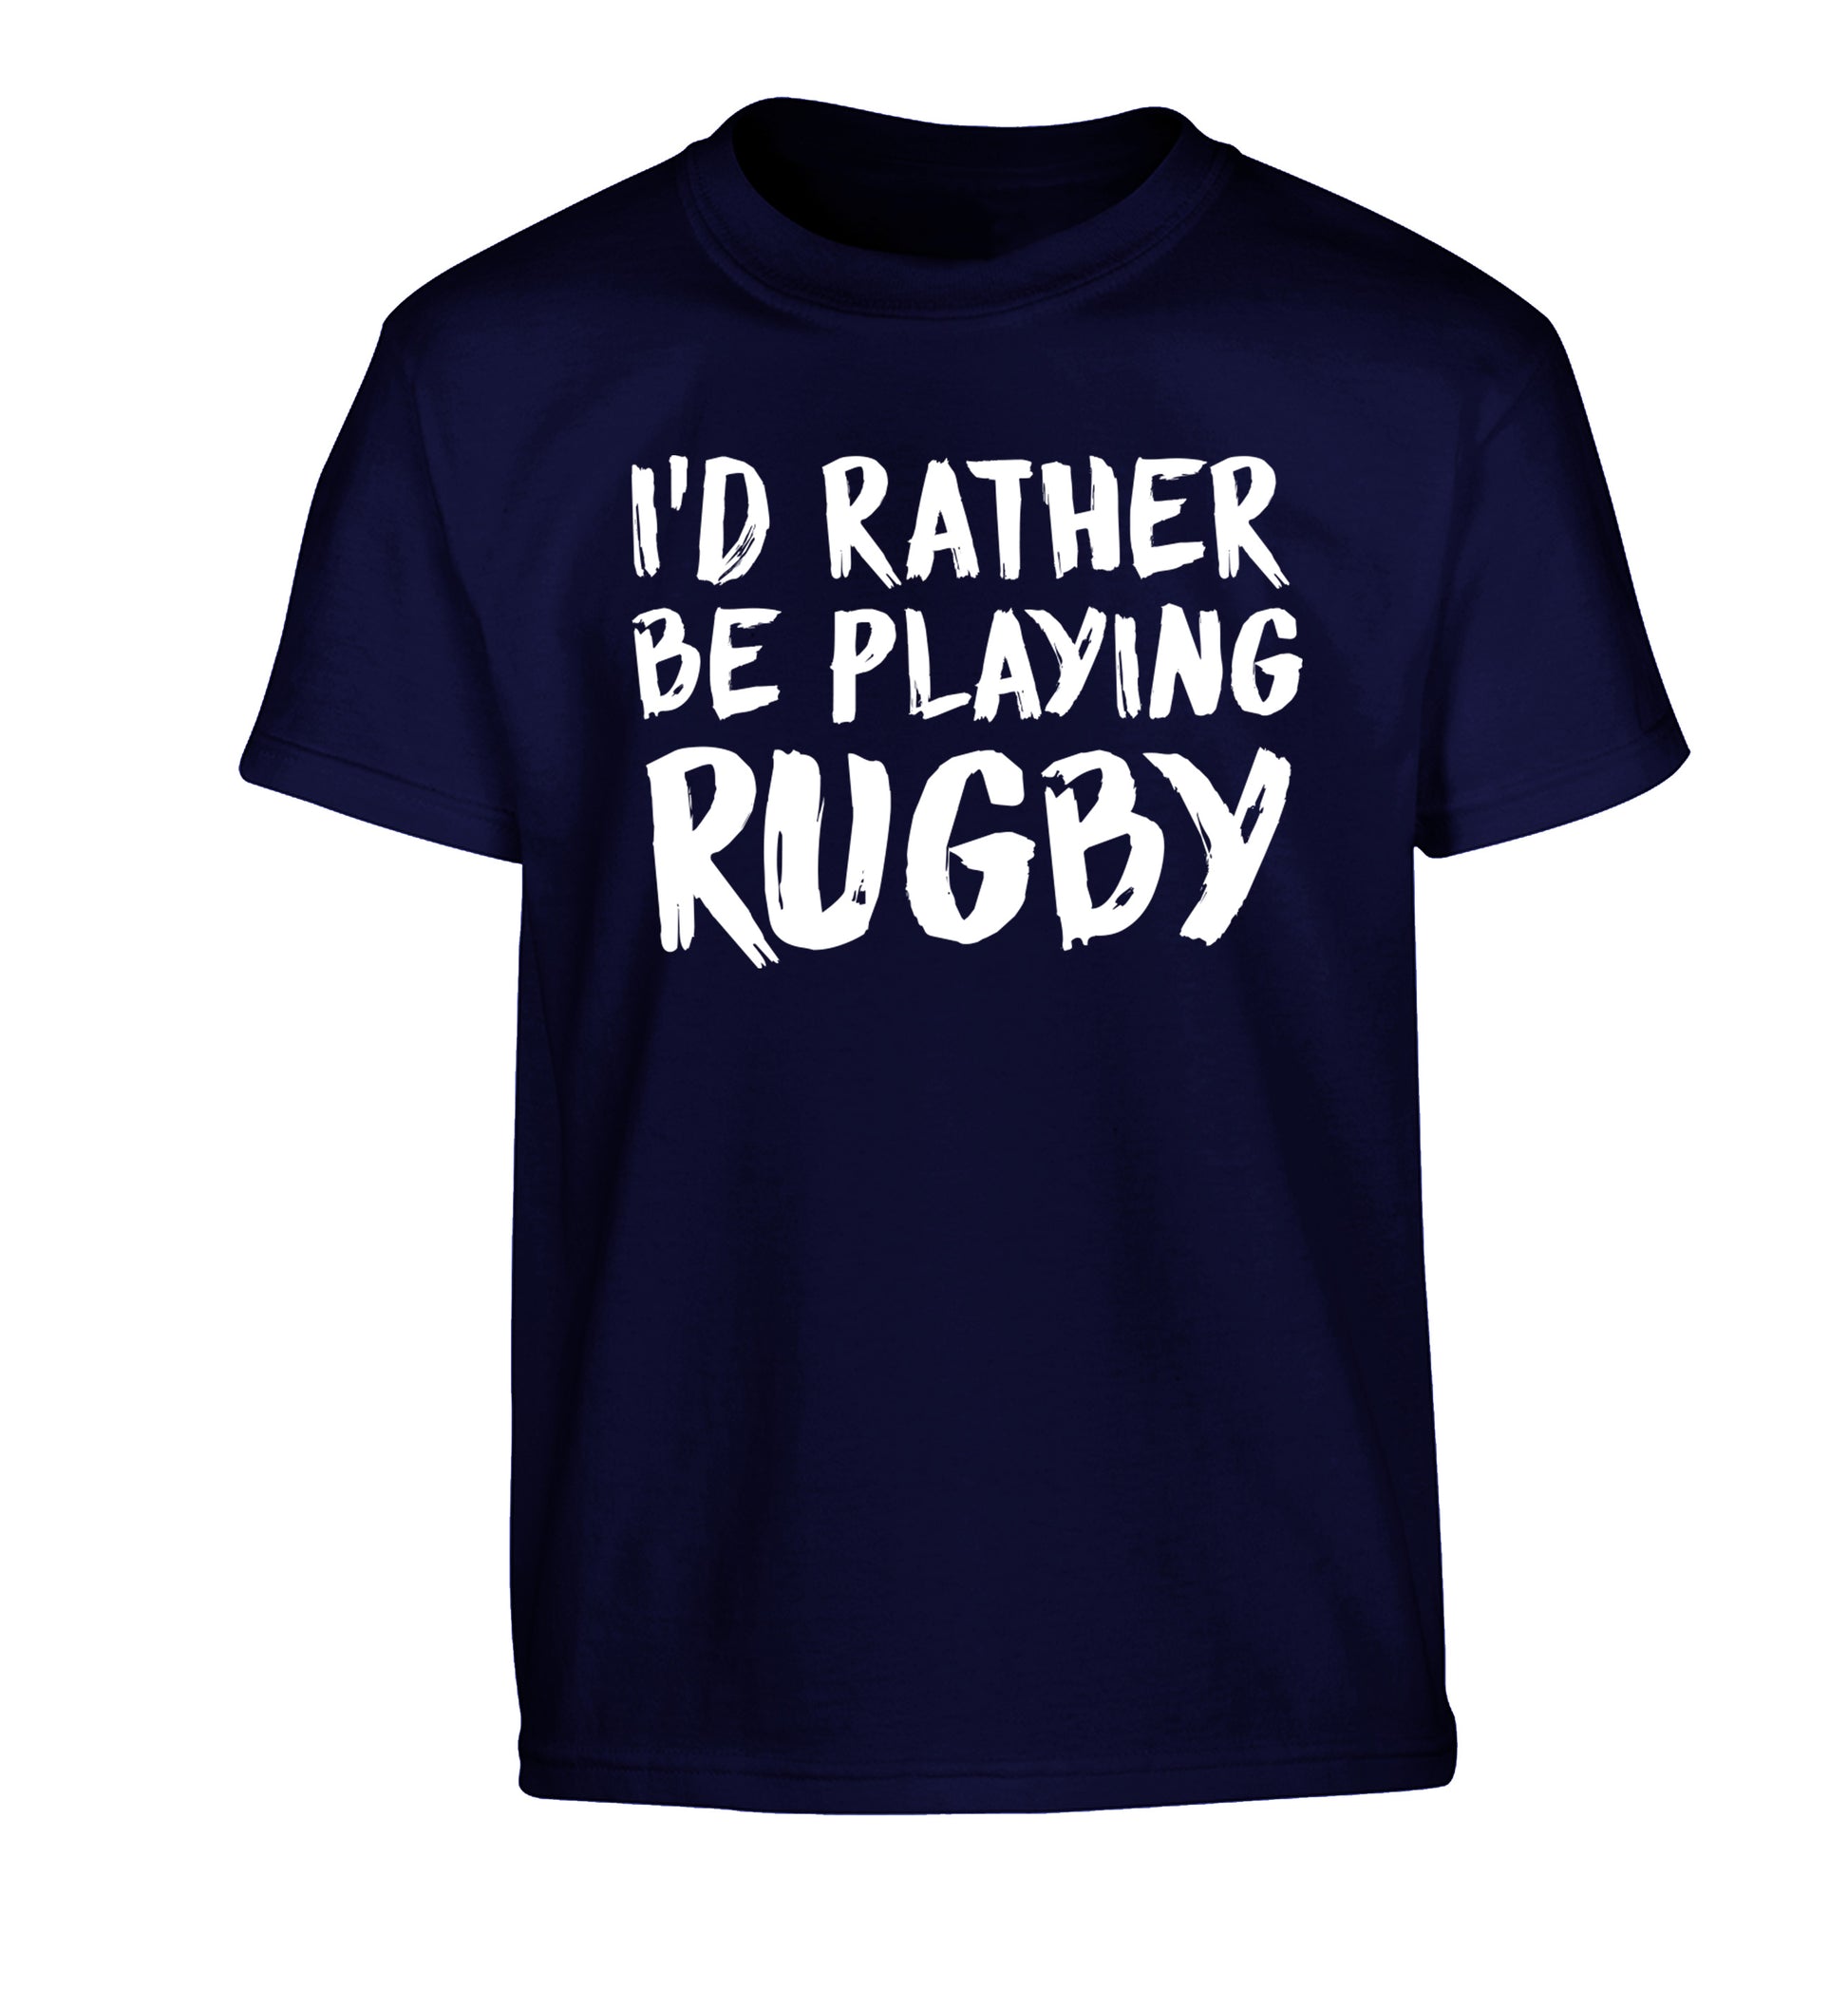 I'd rather be playing rugby Children's navy Tshirt 12-13 Years